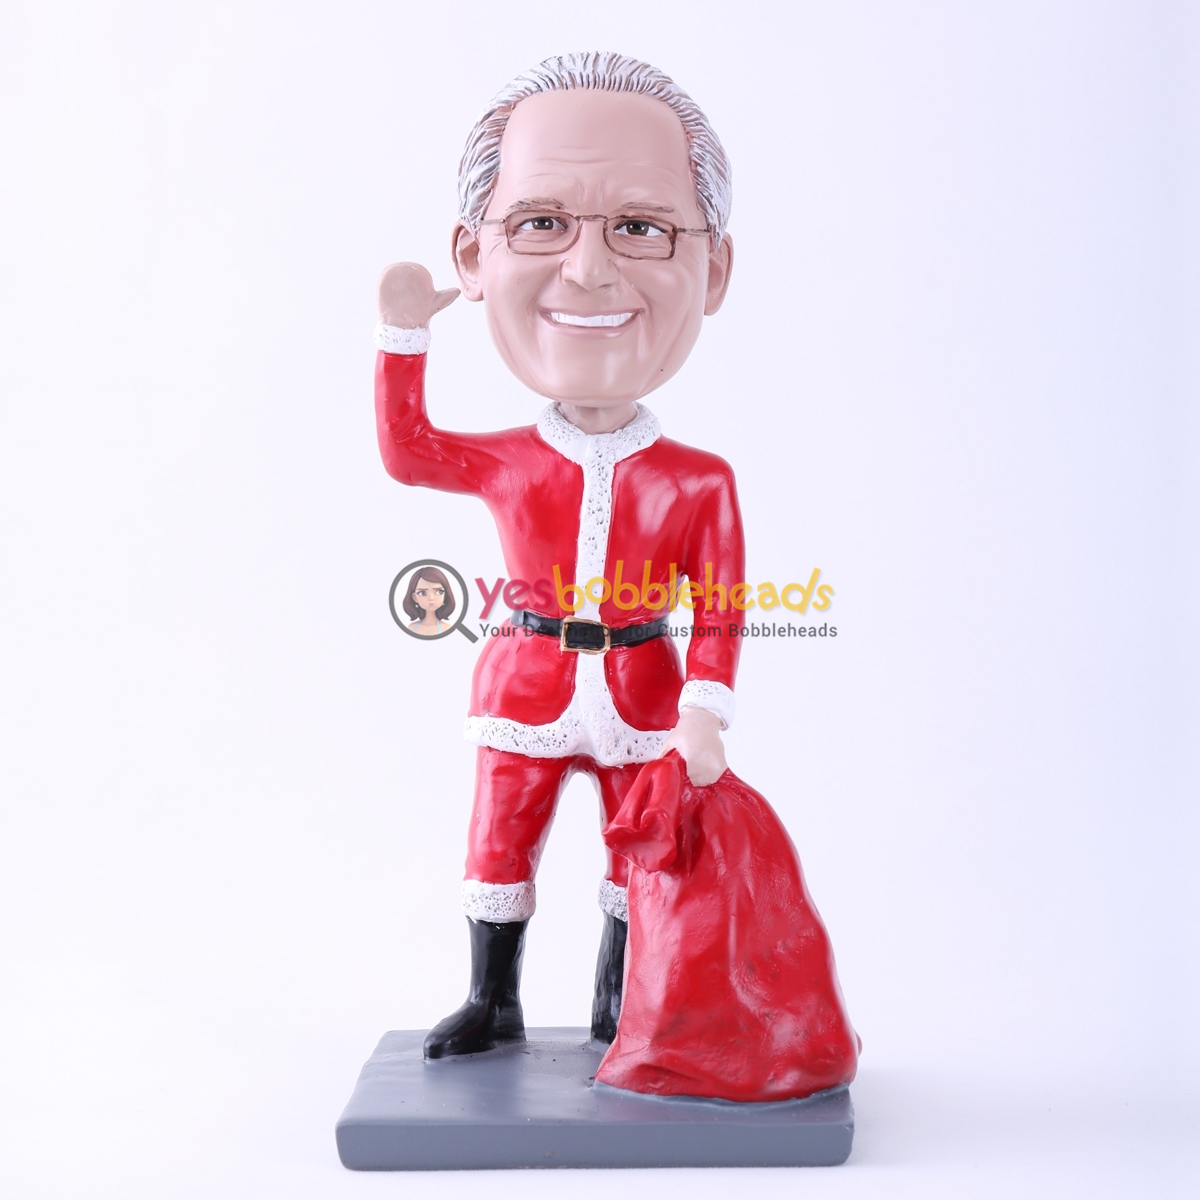 Picture of Custom Bobblehead Doll: Santa Claus Saying Hi (About 9" Tall)